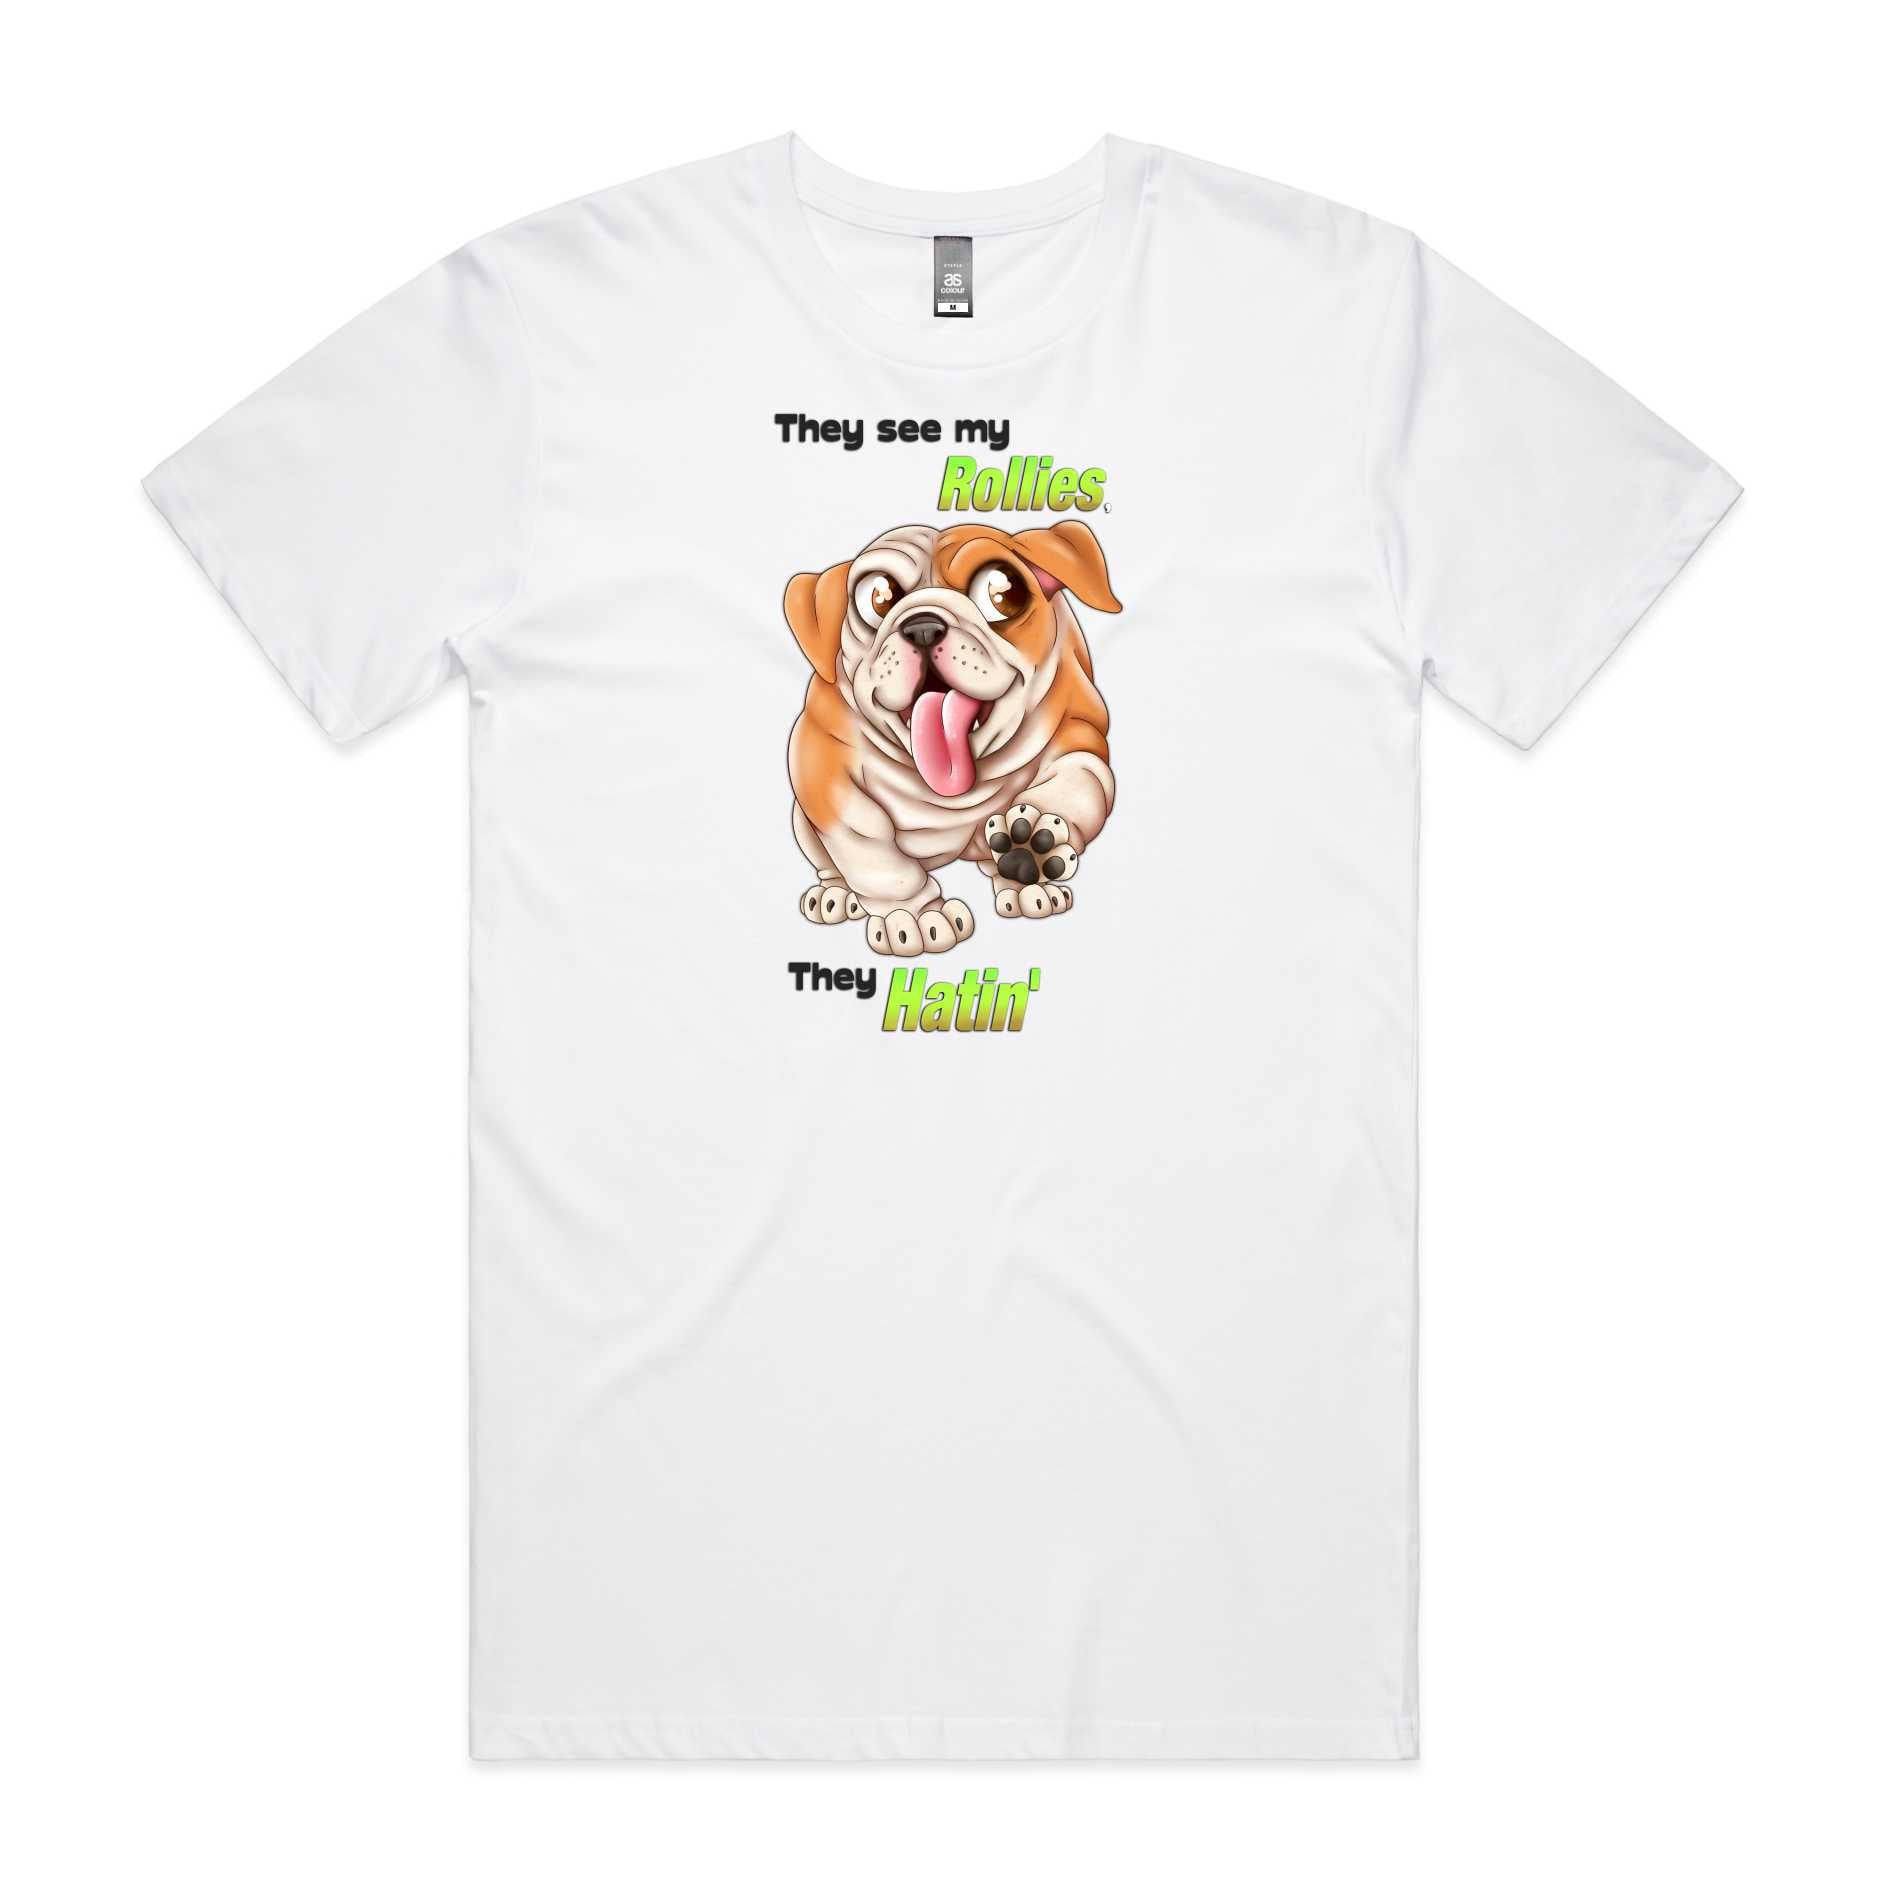 They See Me Rollies T-Shirt